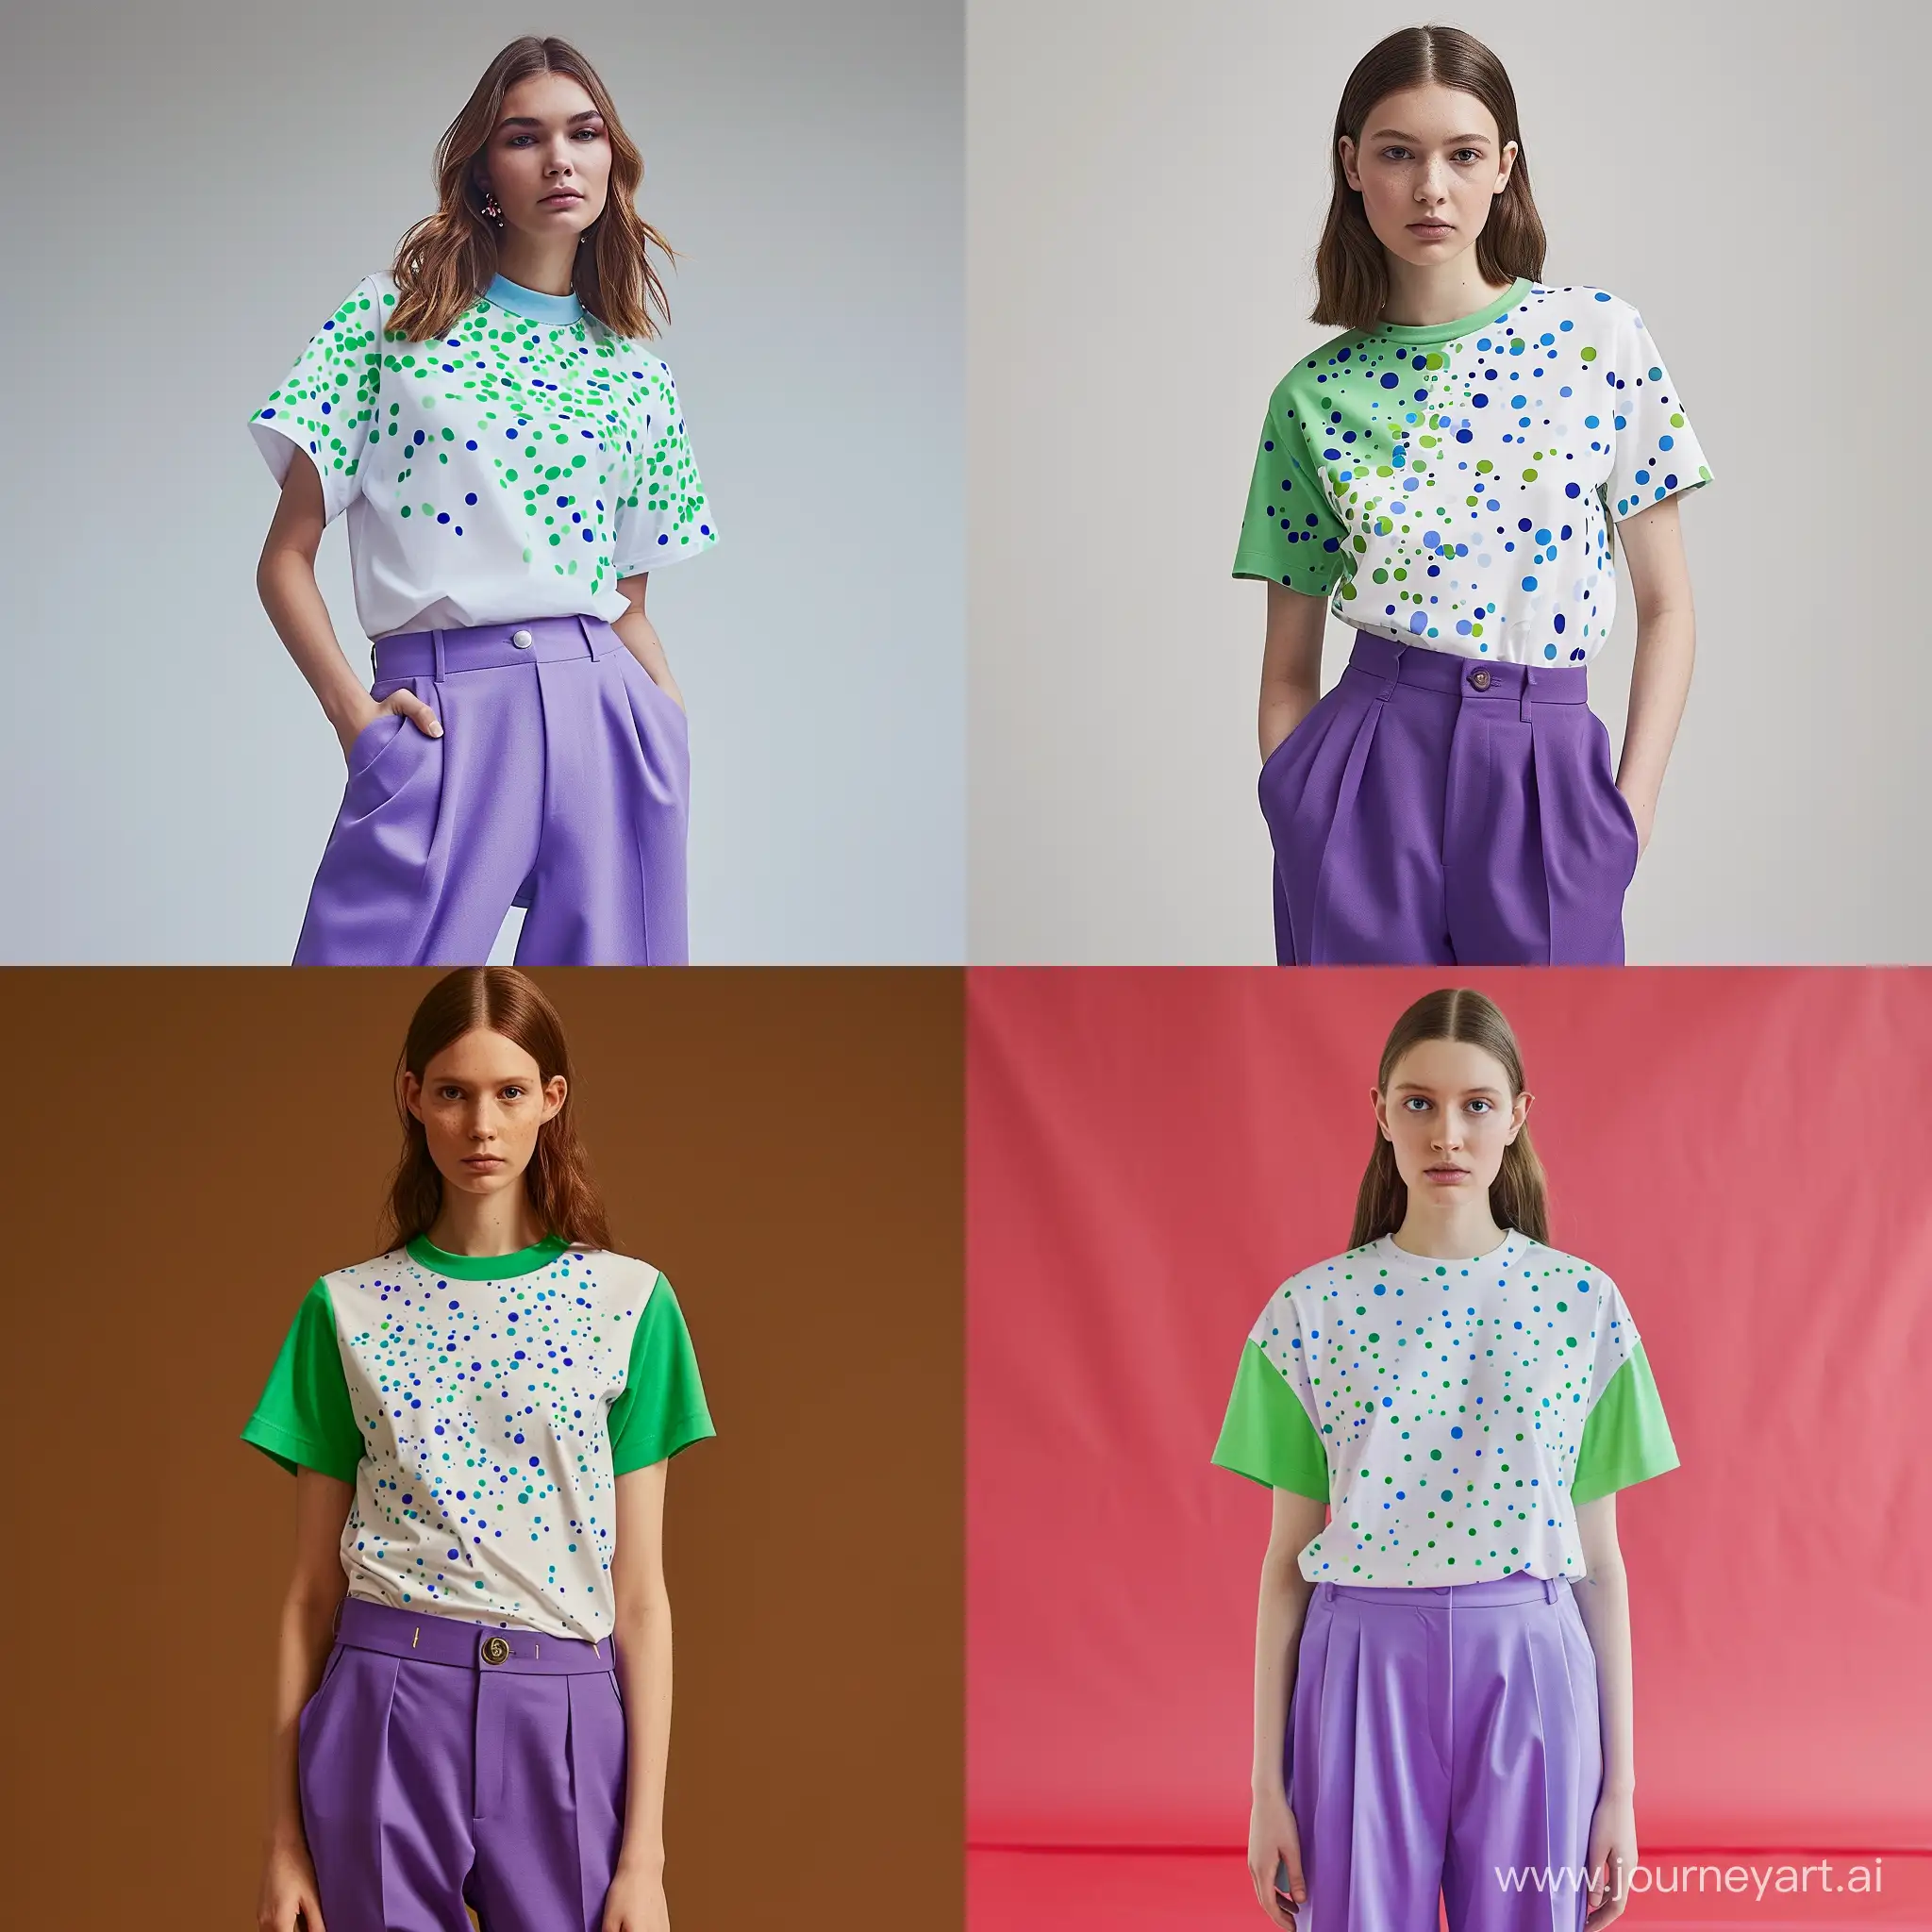 Stylish-Female-Model-in-Vibrant-Dotted-TShirt-and-Purple-Trousers